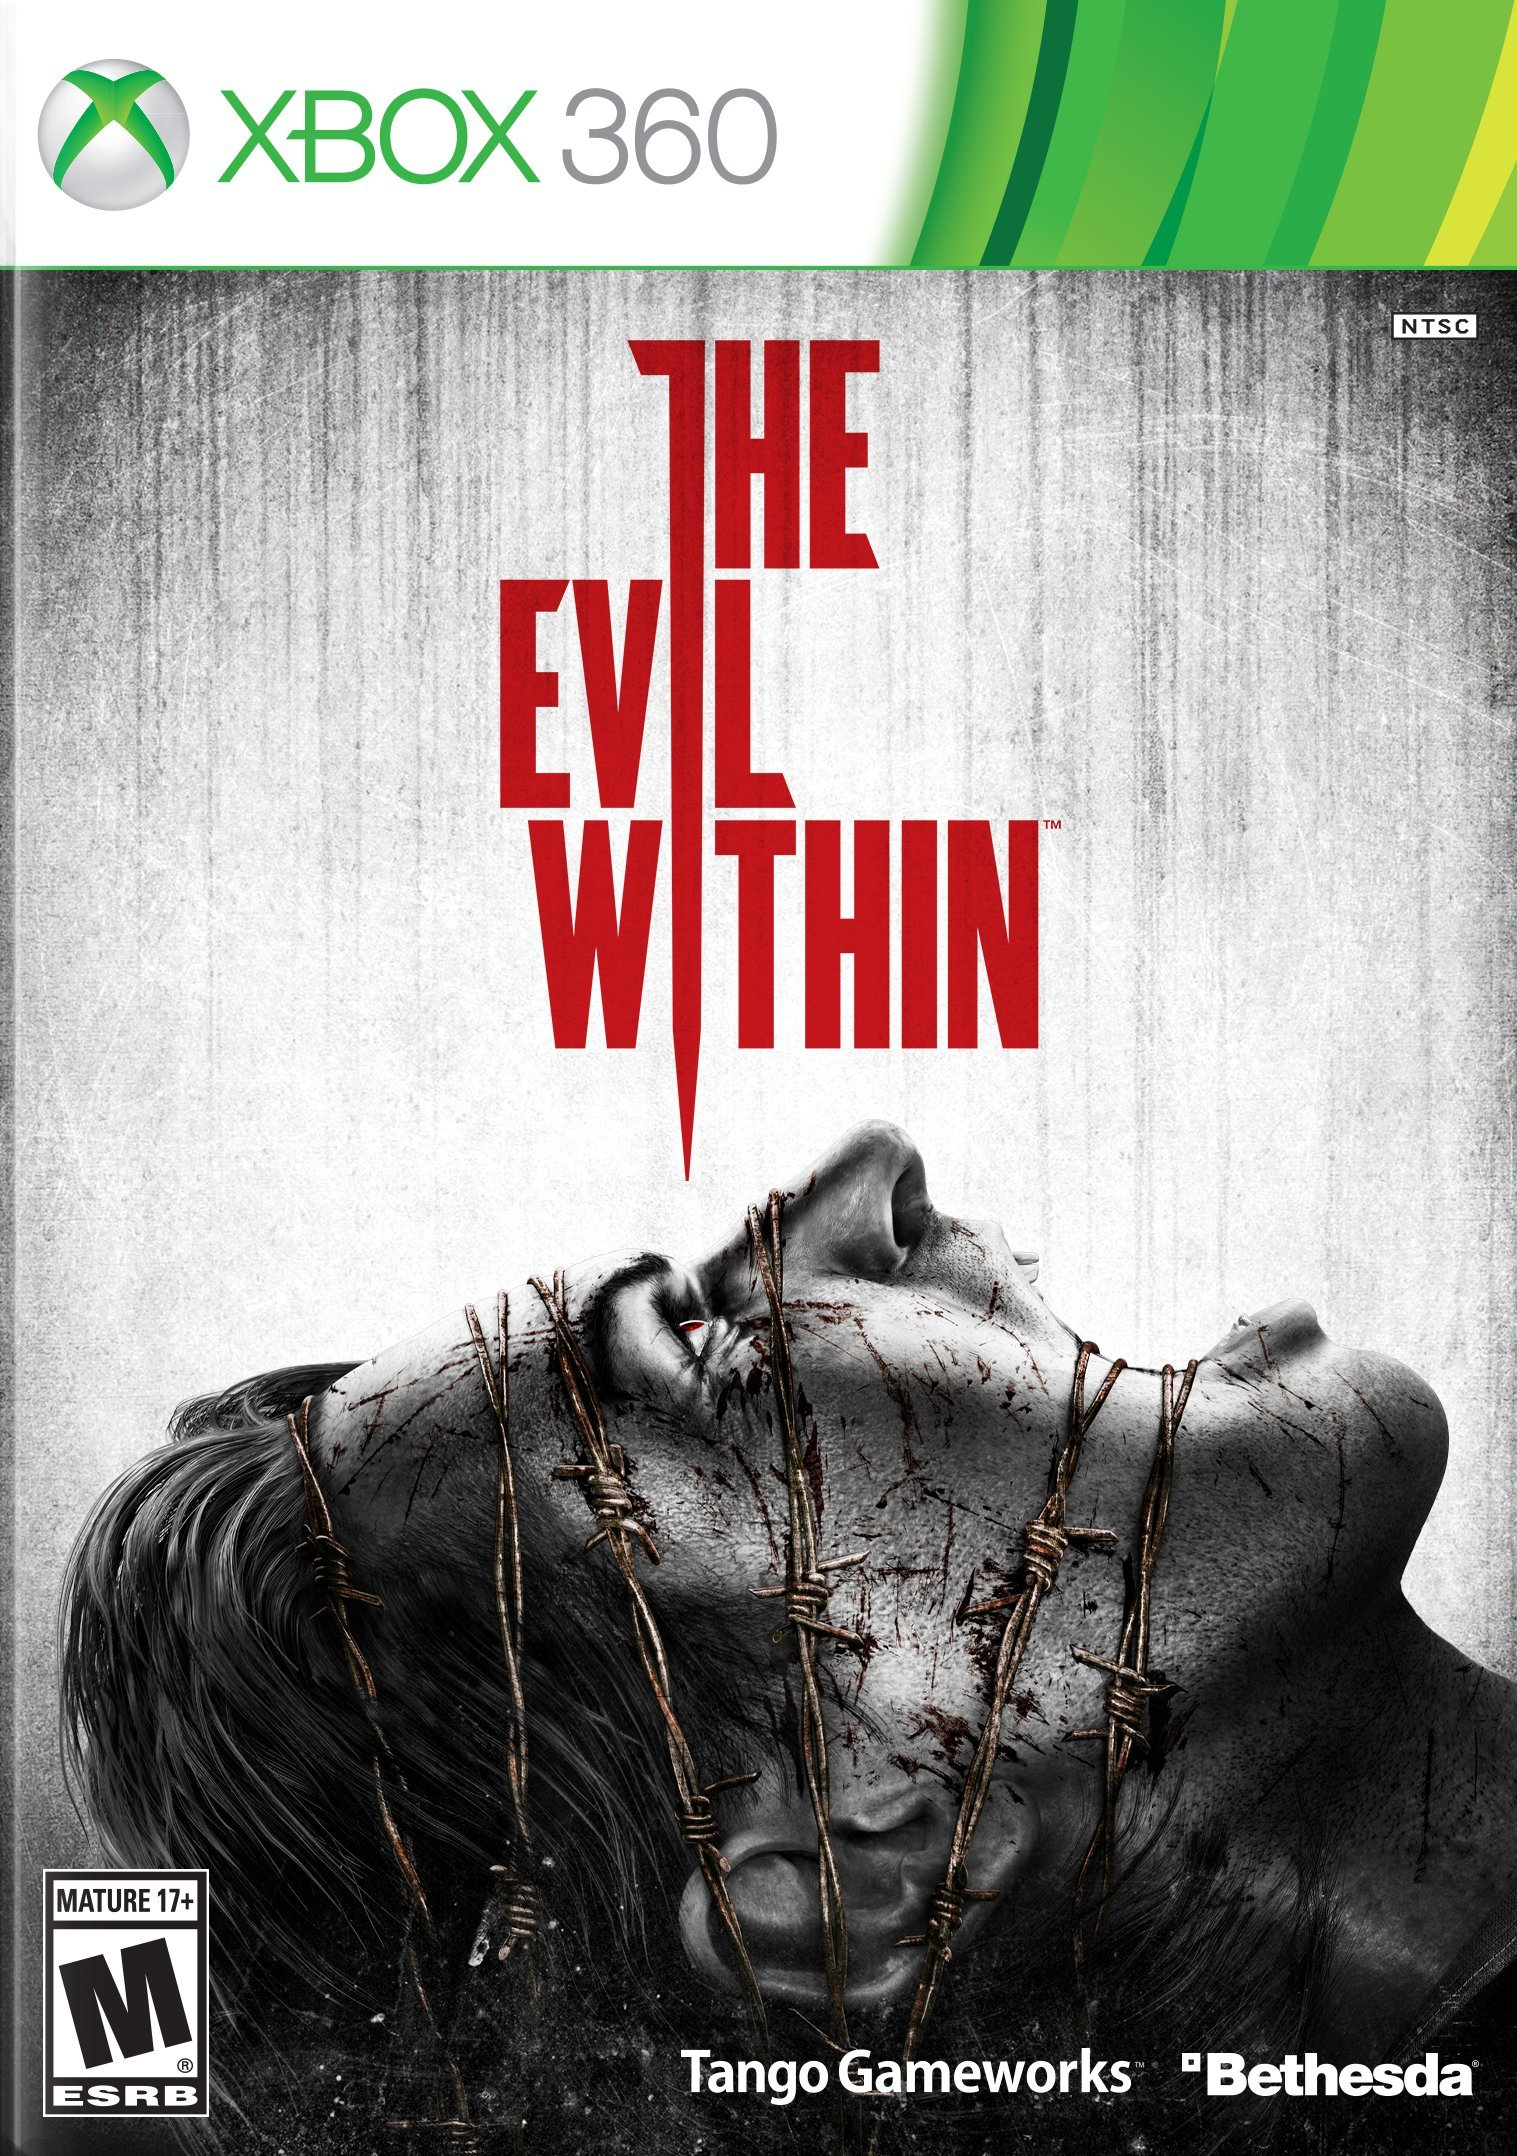 image 50 - Xbox 360 Games Download - THE EVIL WITHIN